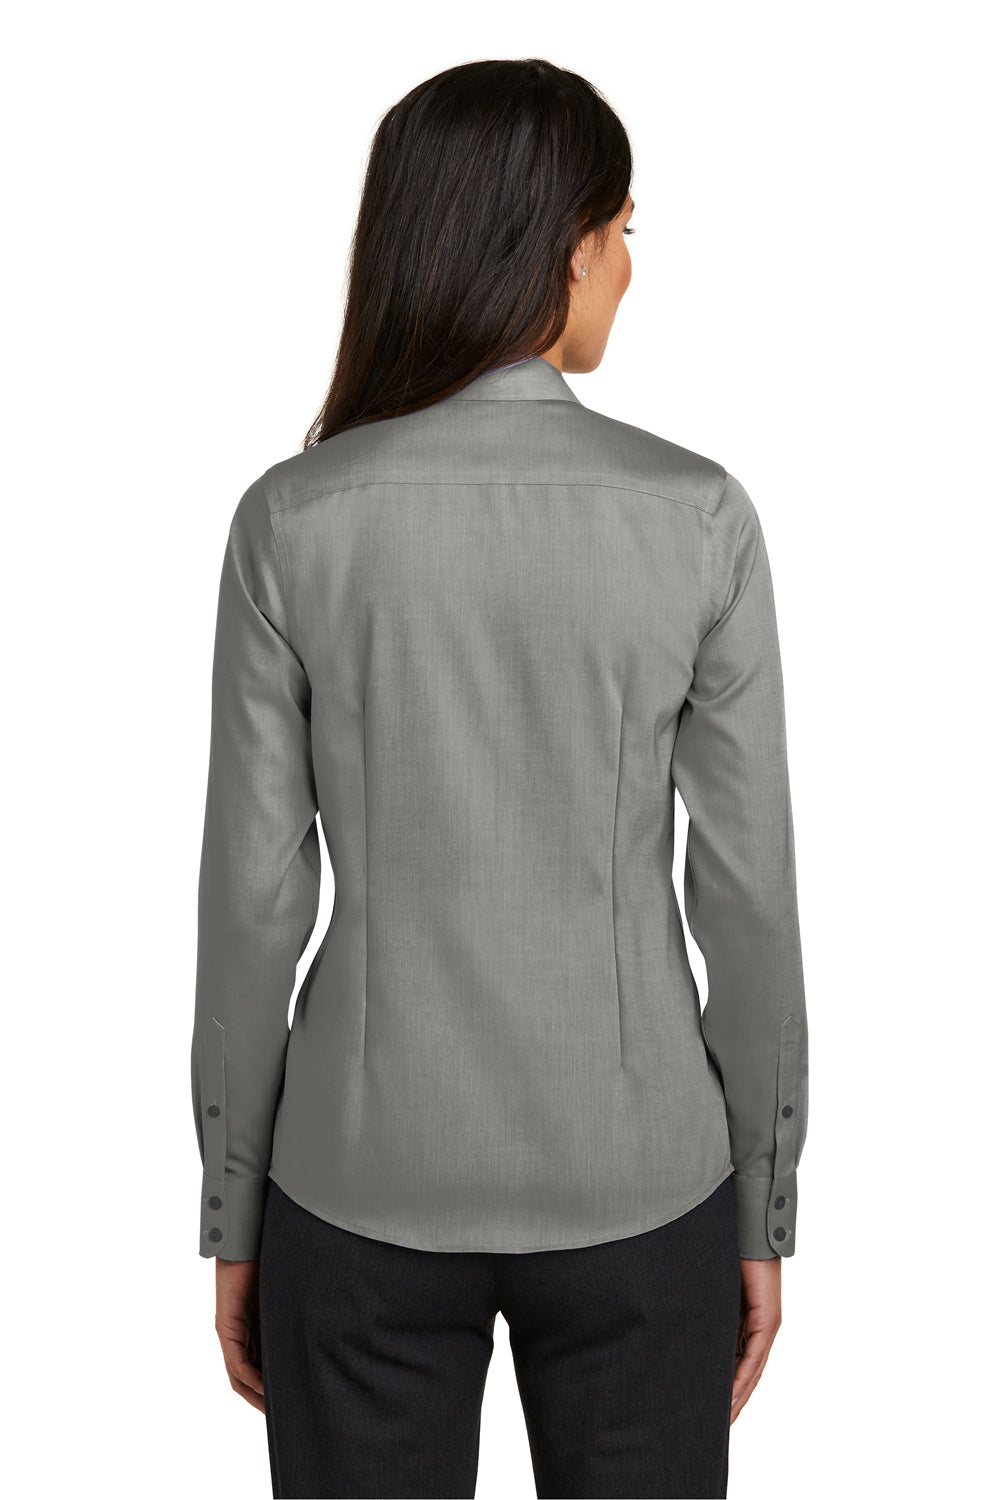 Red House RH250 Womens Pinpoint Oxford Wrinkle Resistant Long Sleeve Button Down Shirt Charcoal Grey Back